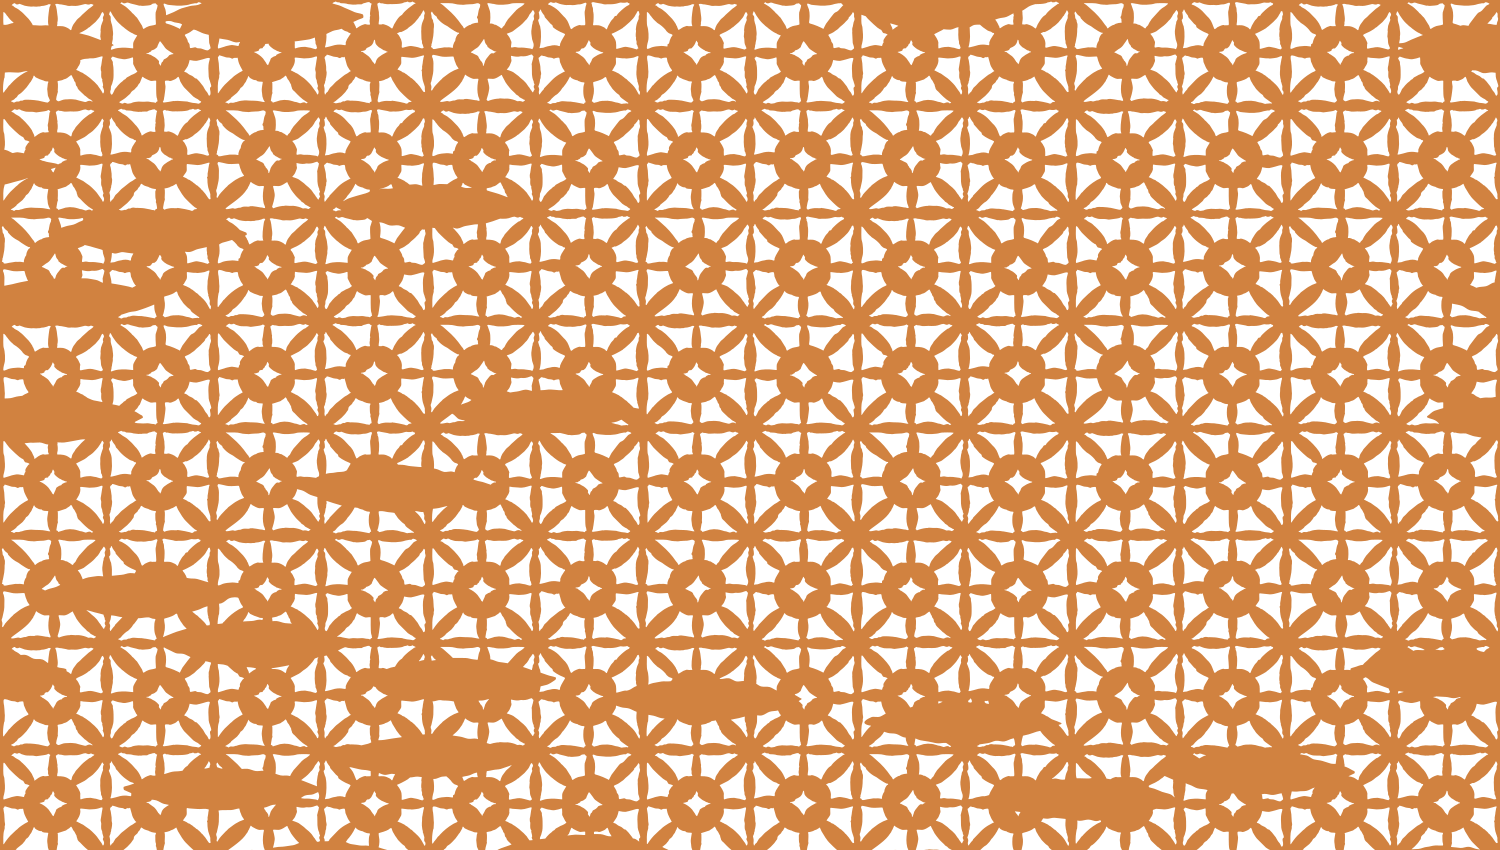 Parasoleil™ Balambra© pattern displayed with a ochre color overlay